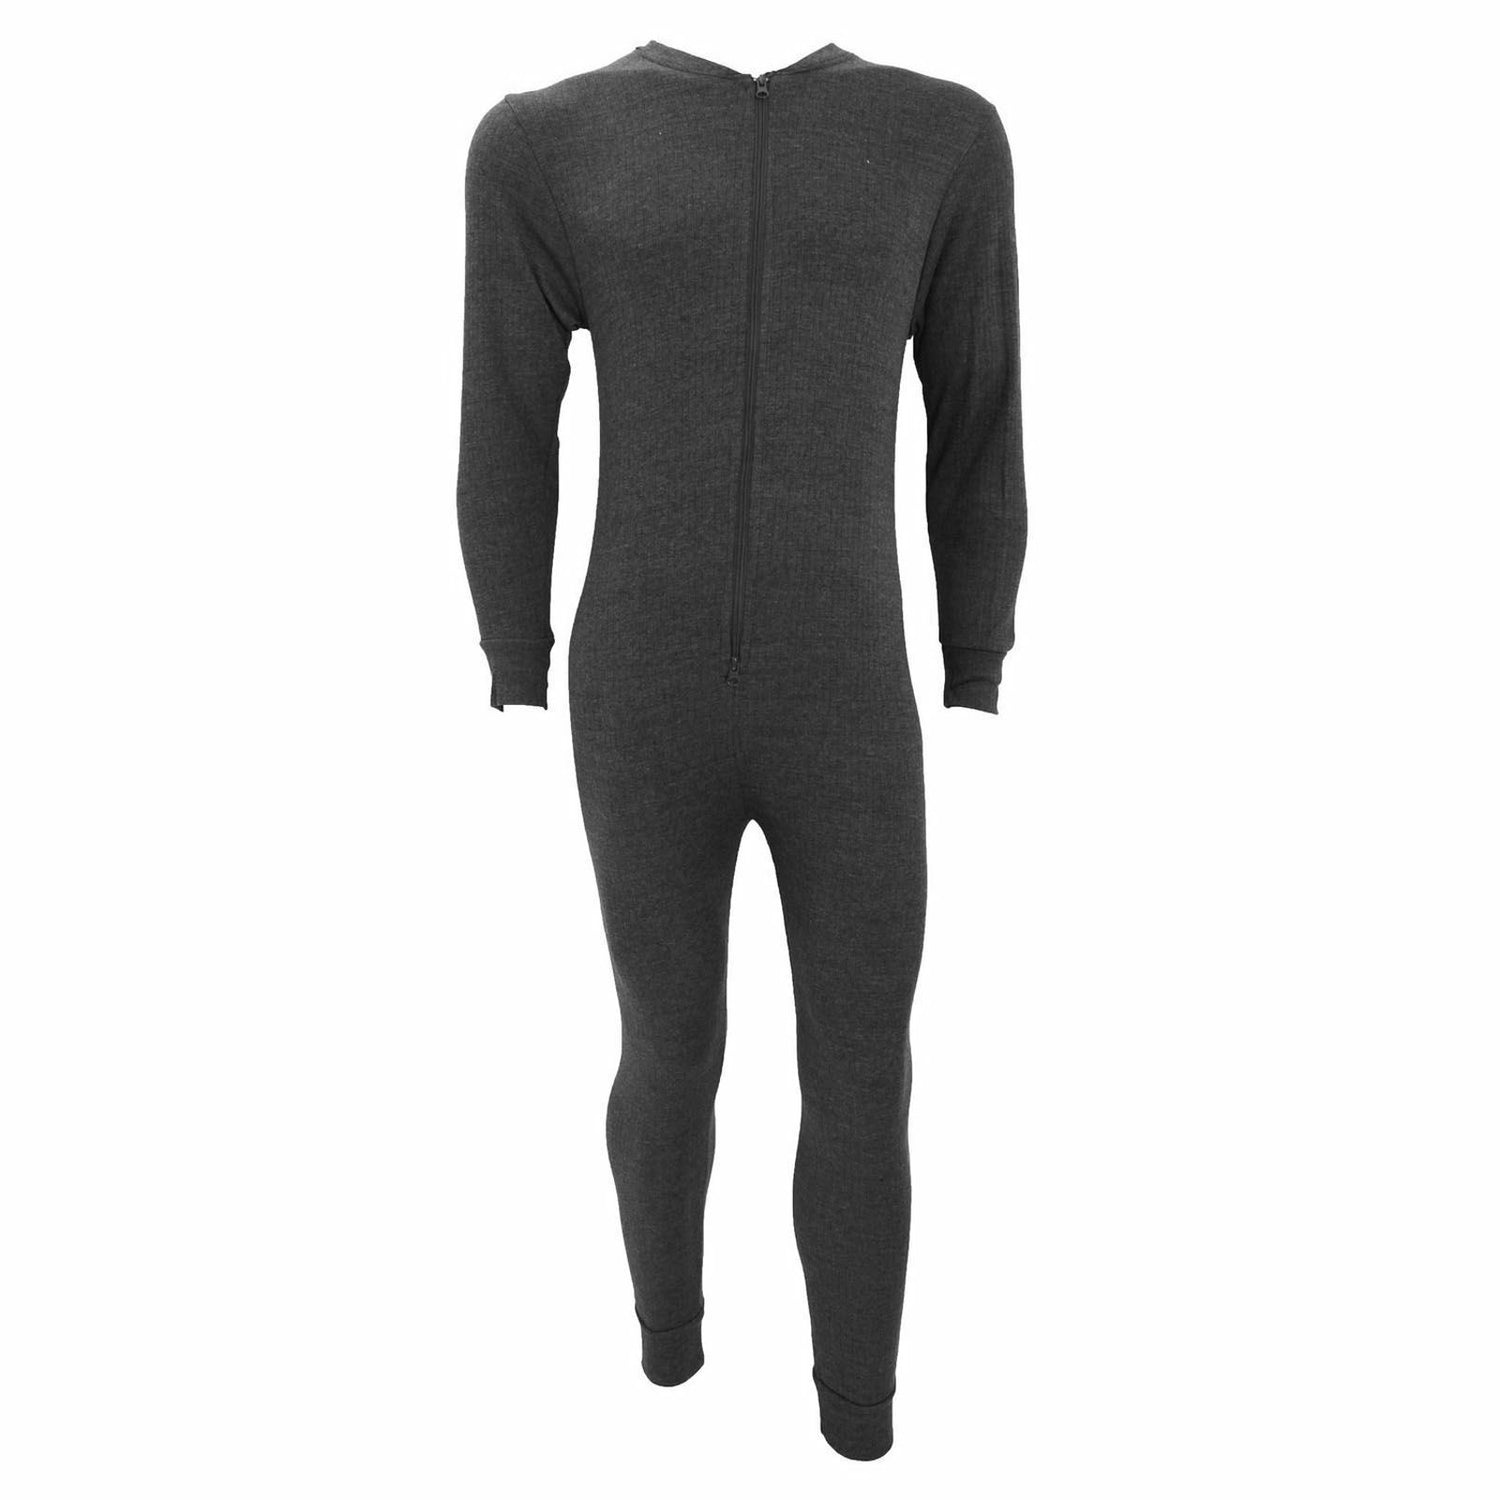 Men's Charcoal Grey All In One Thermals.